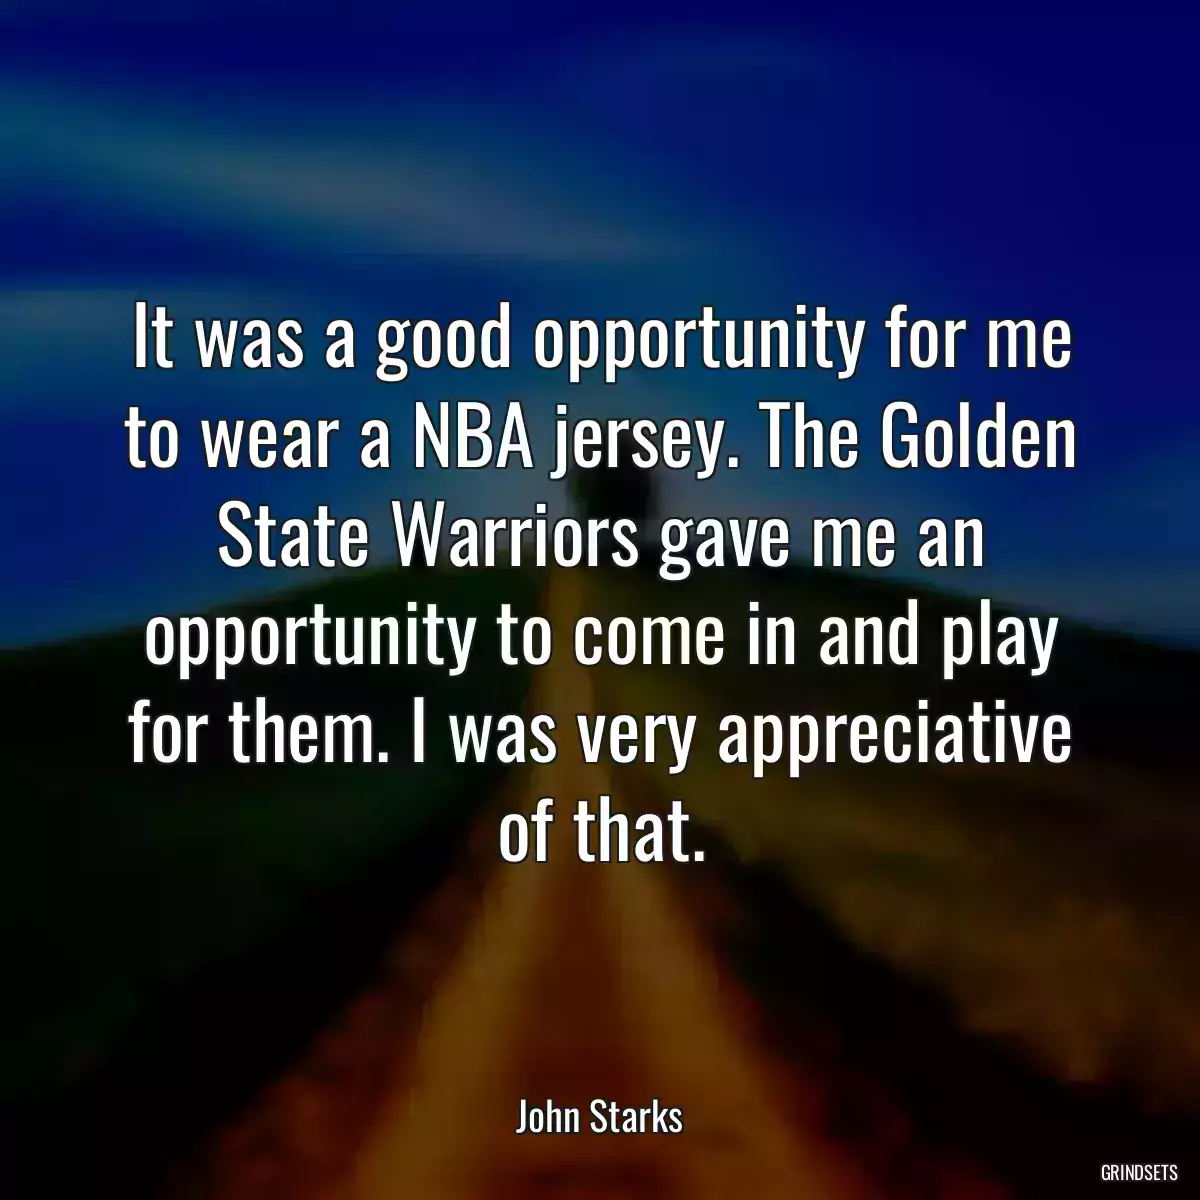 It was a good opportunity for me to wear a NBA jersey. The Golden State Warriors gave me an opportunity to come in and play for them. I was very appreciative of that.